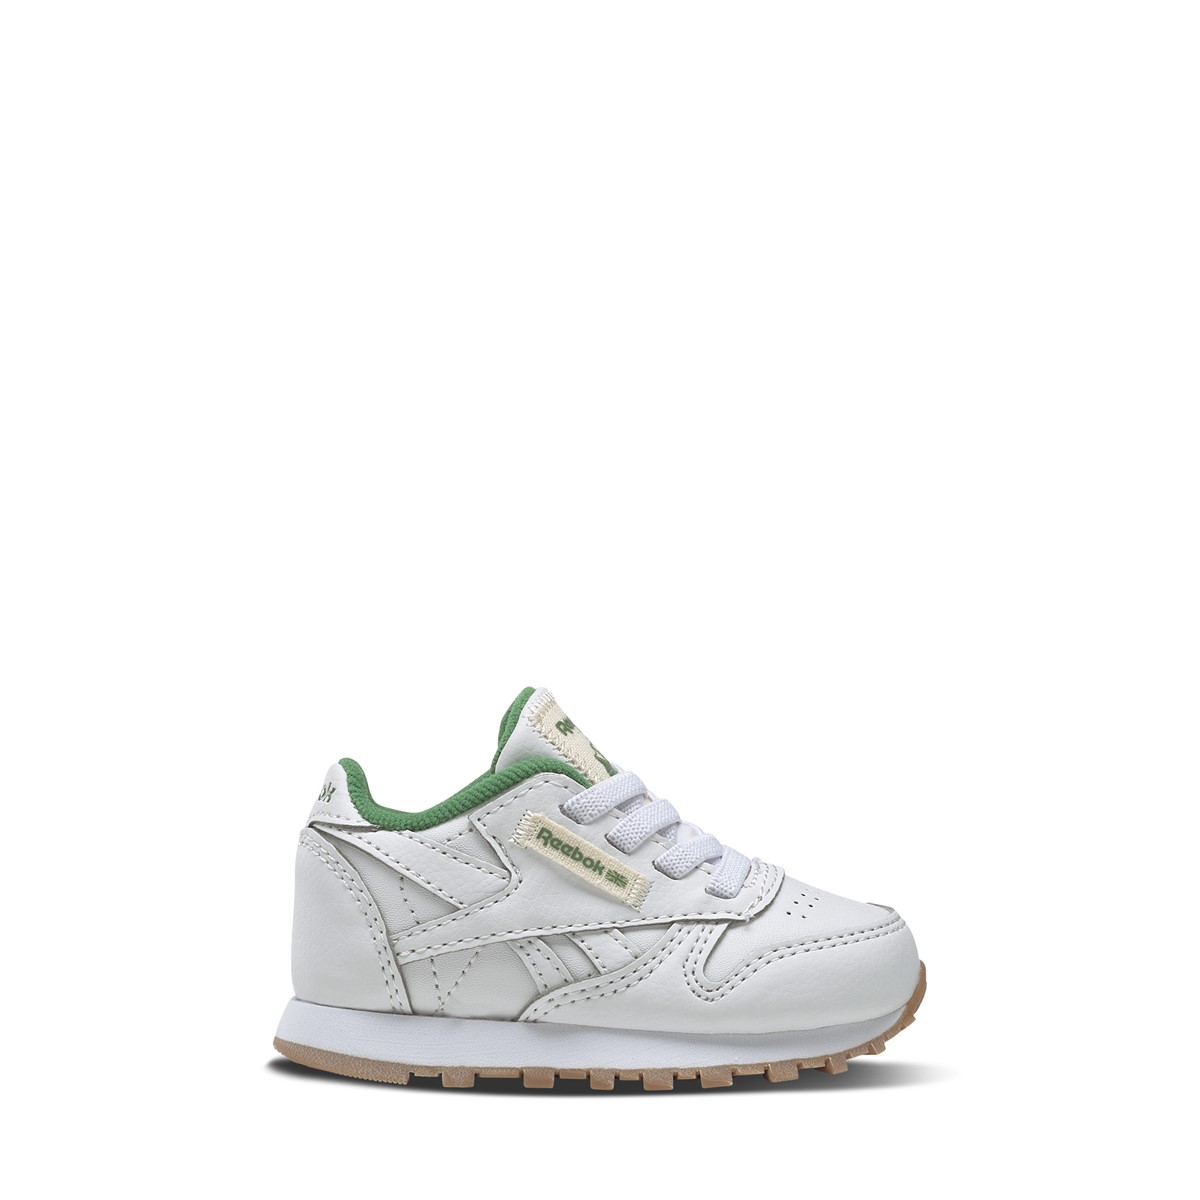 Toddler's Classic Leather Sneakers in White/Green